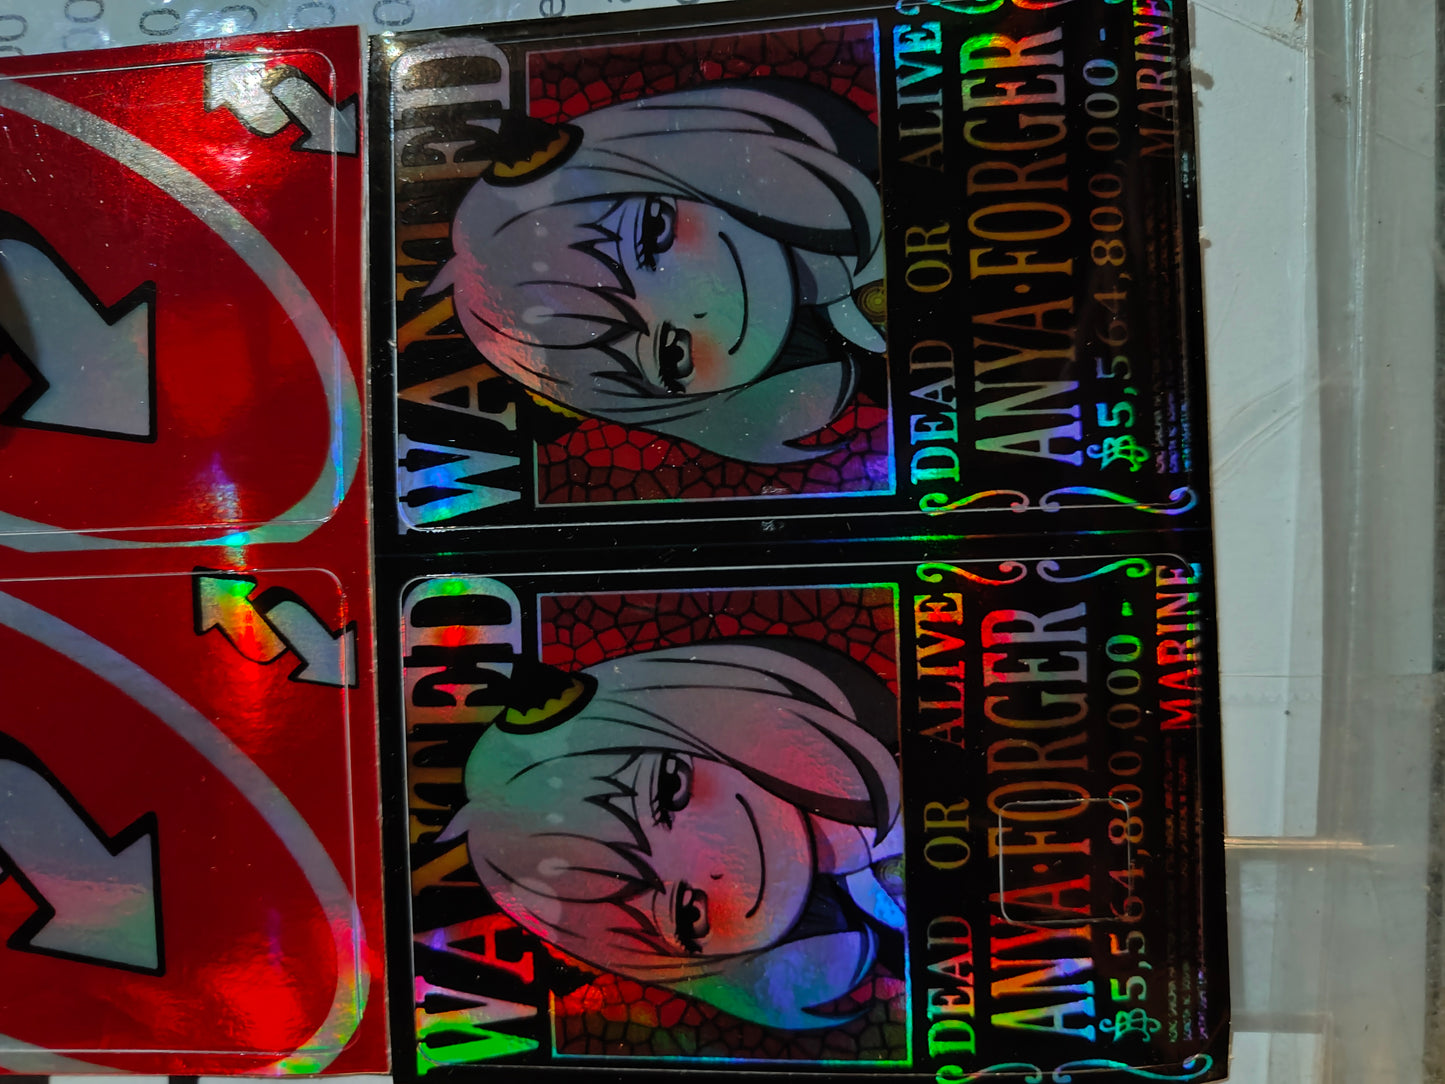 Spy X Family - Anya Wanted Poster Holographic Credit Card Sticker (Please Read Description)